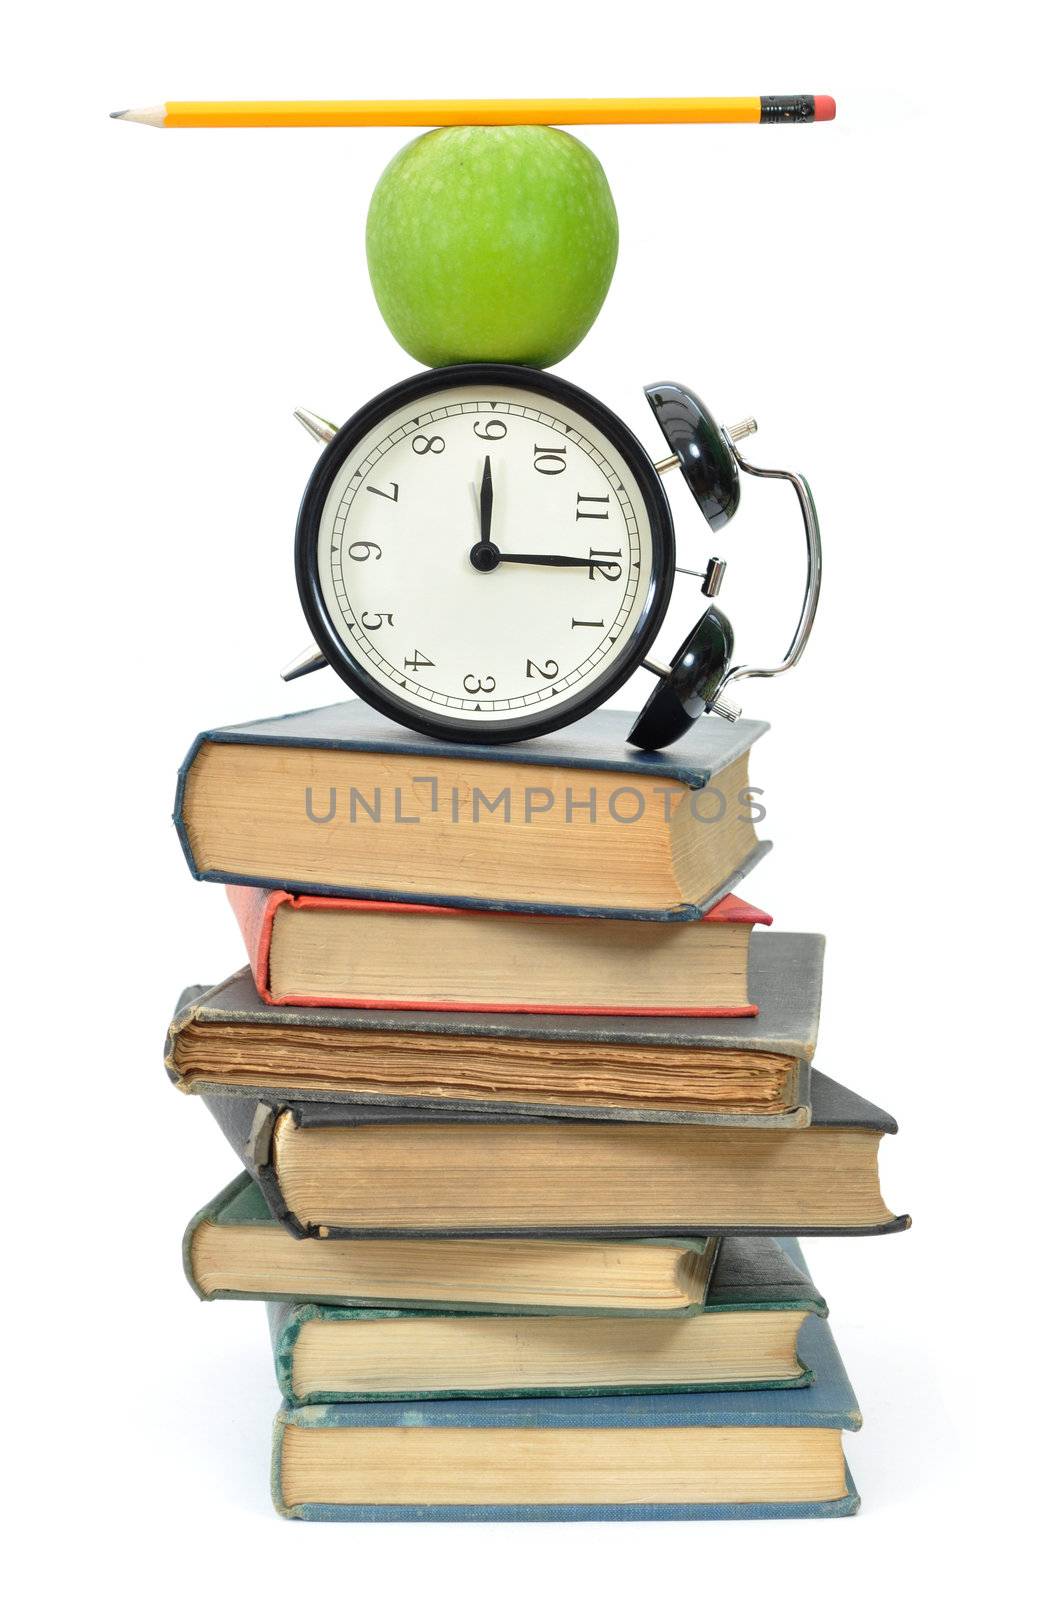 Balancing act of objects, including an apple and closk, on top of a stack of books 